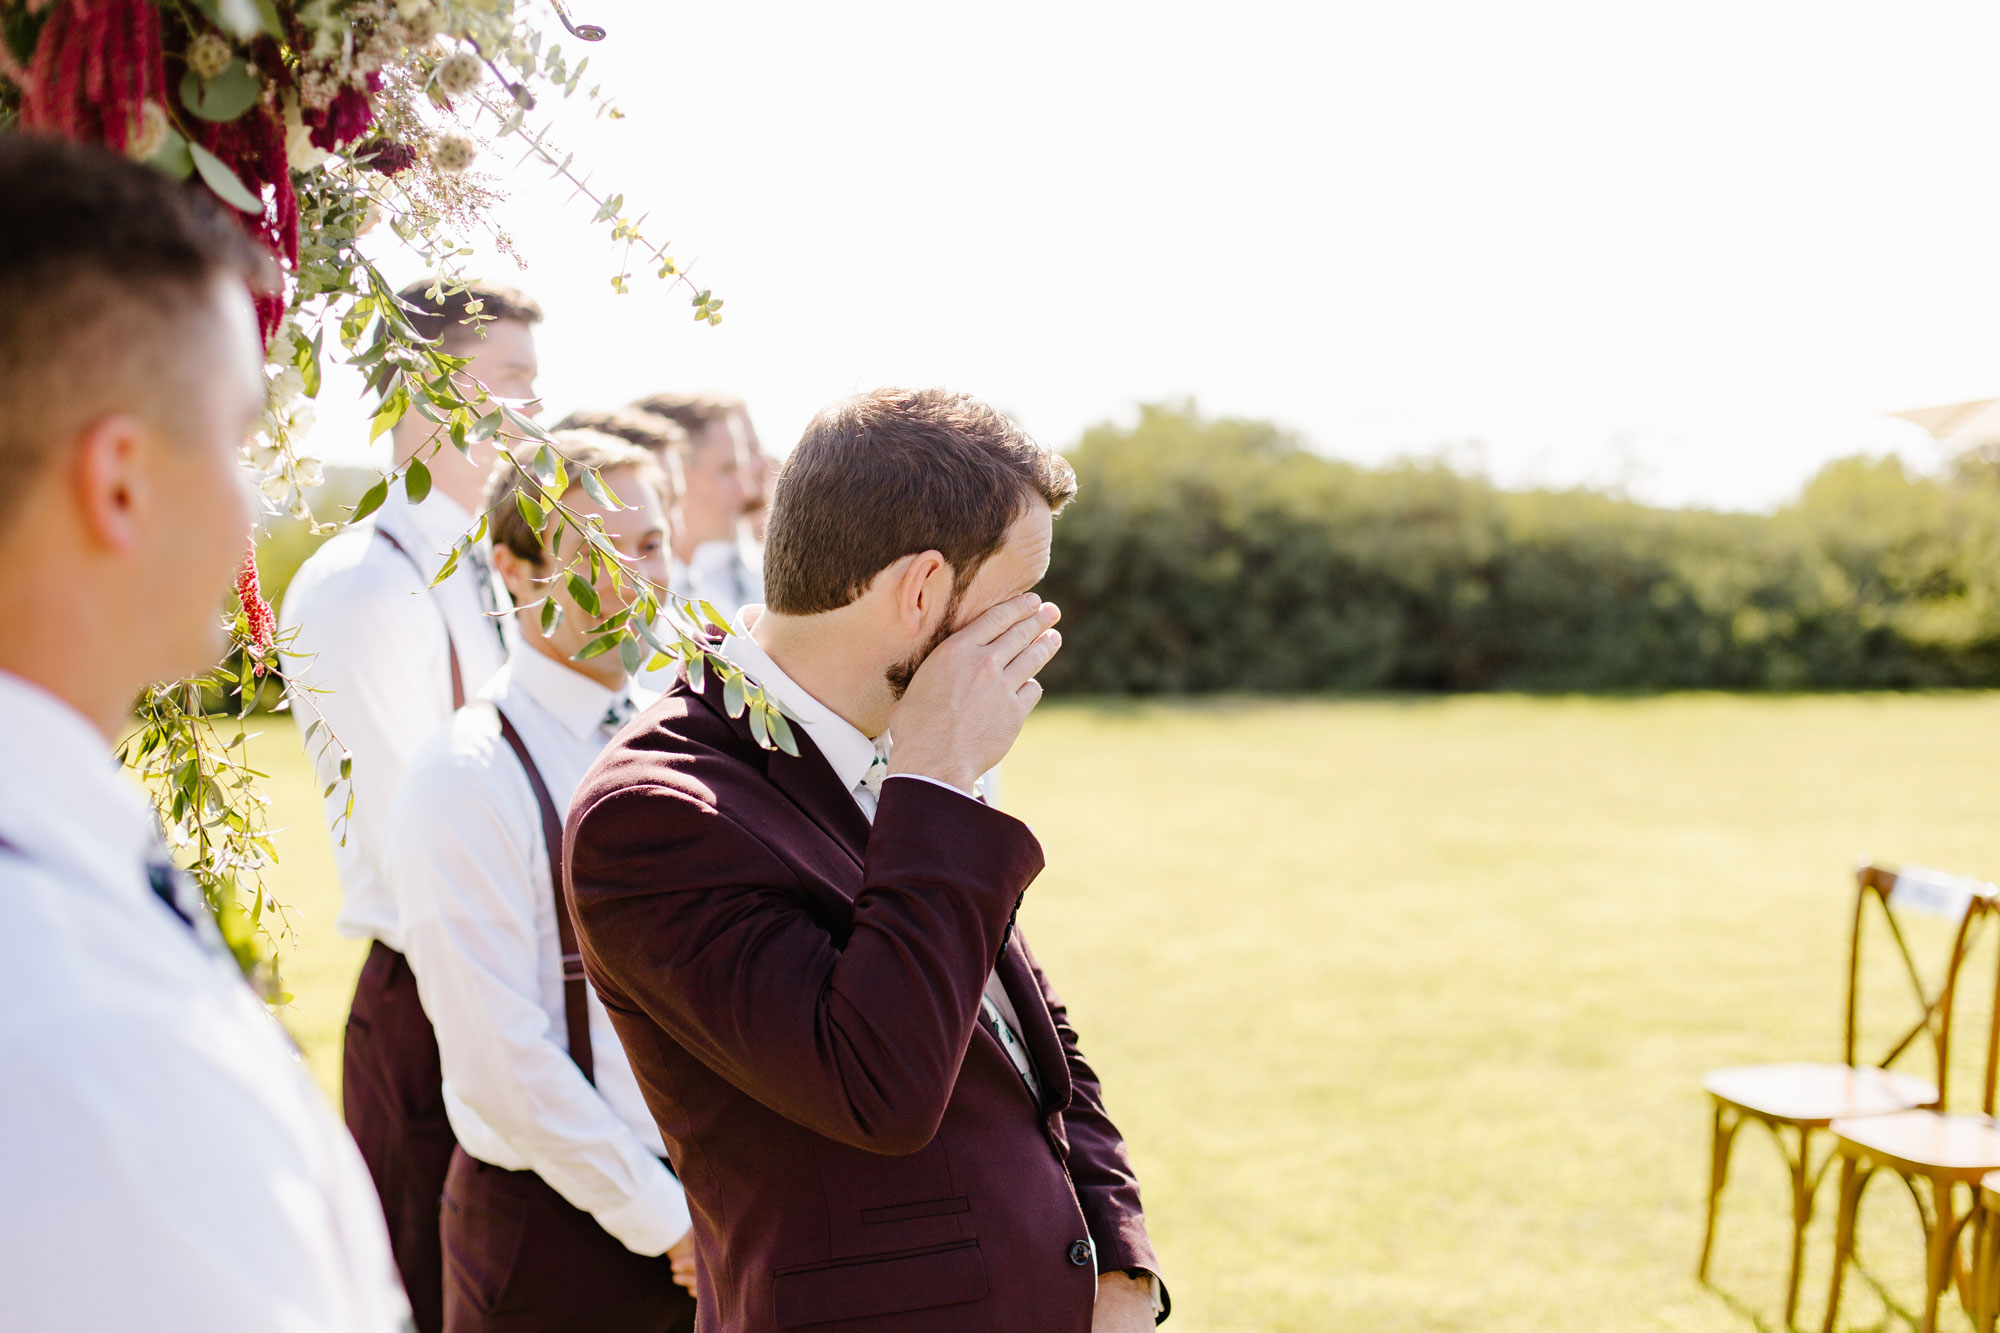 Groom Tearing up During the Ceremony